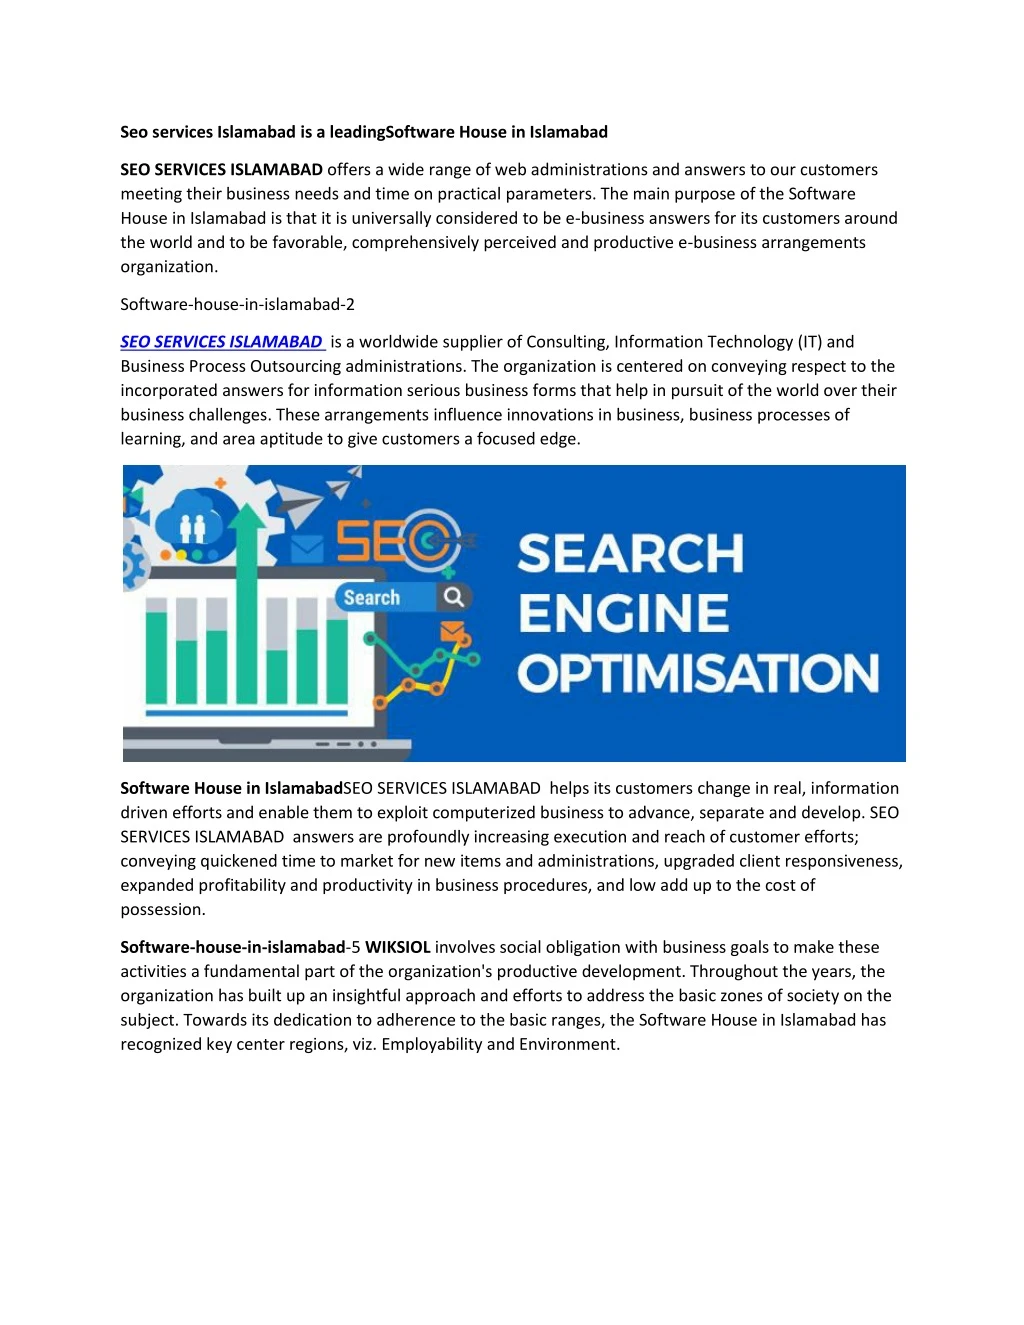 seo services islamabad is a leadingsoftware house